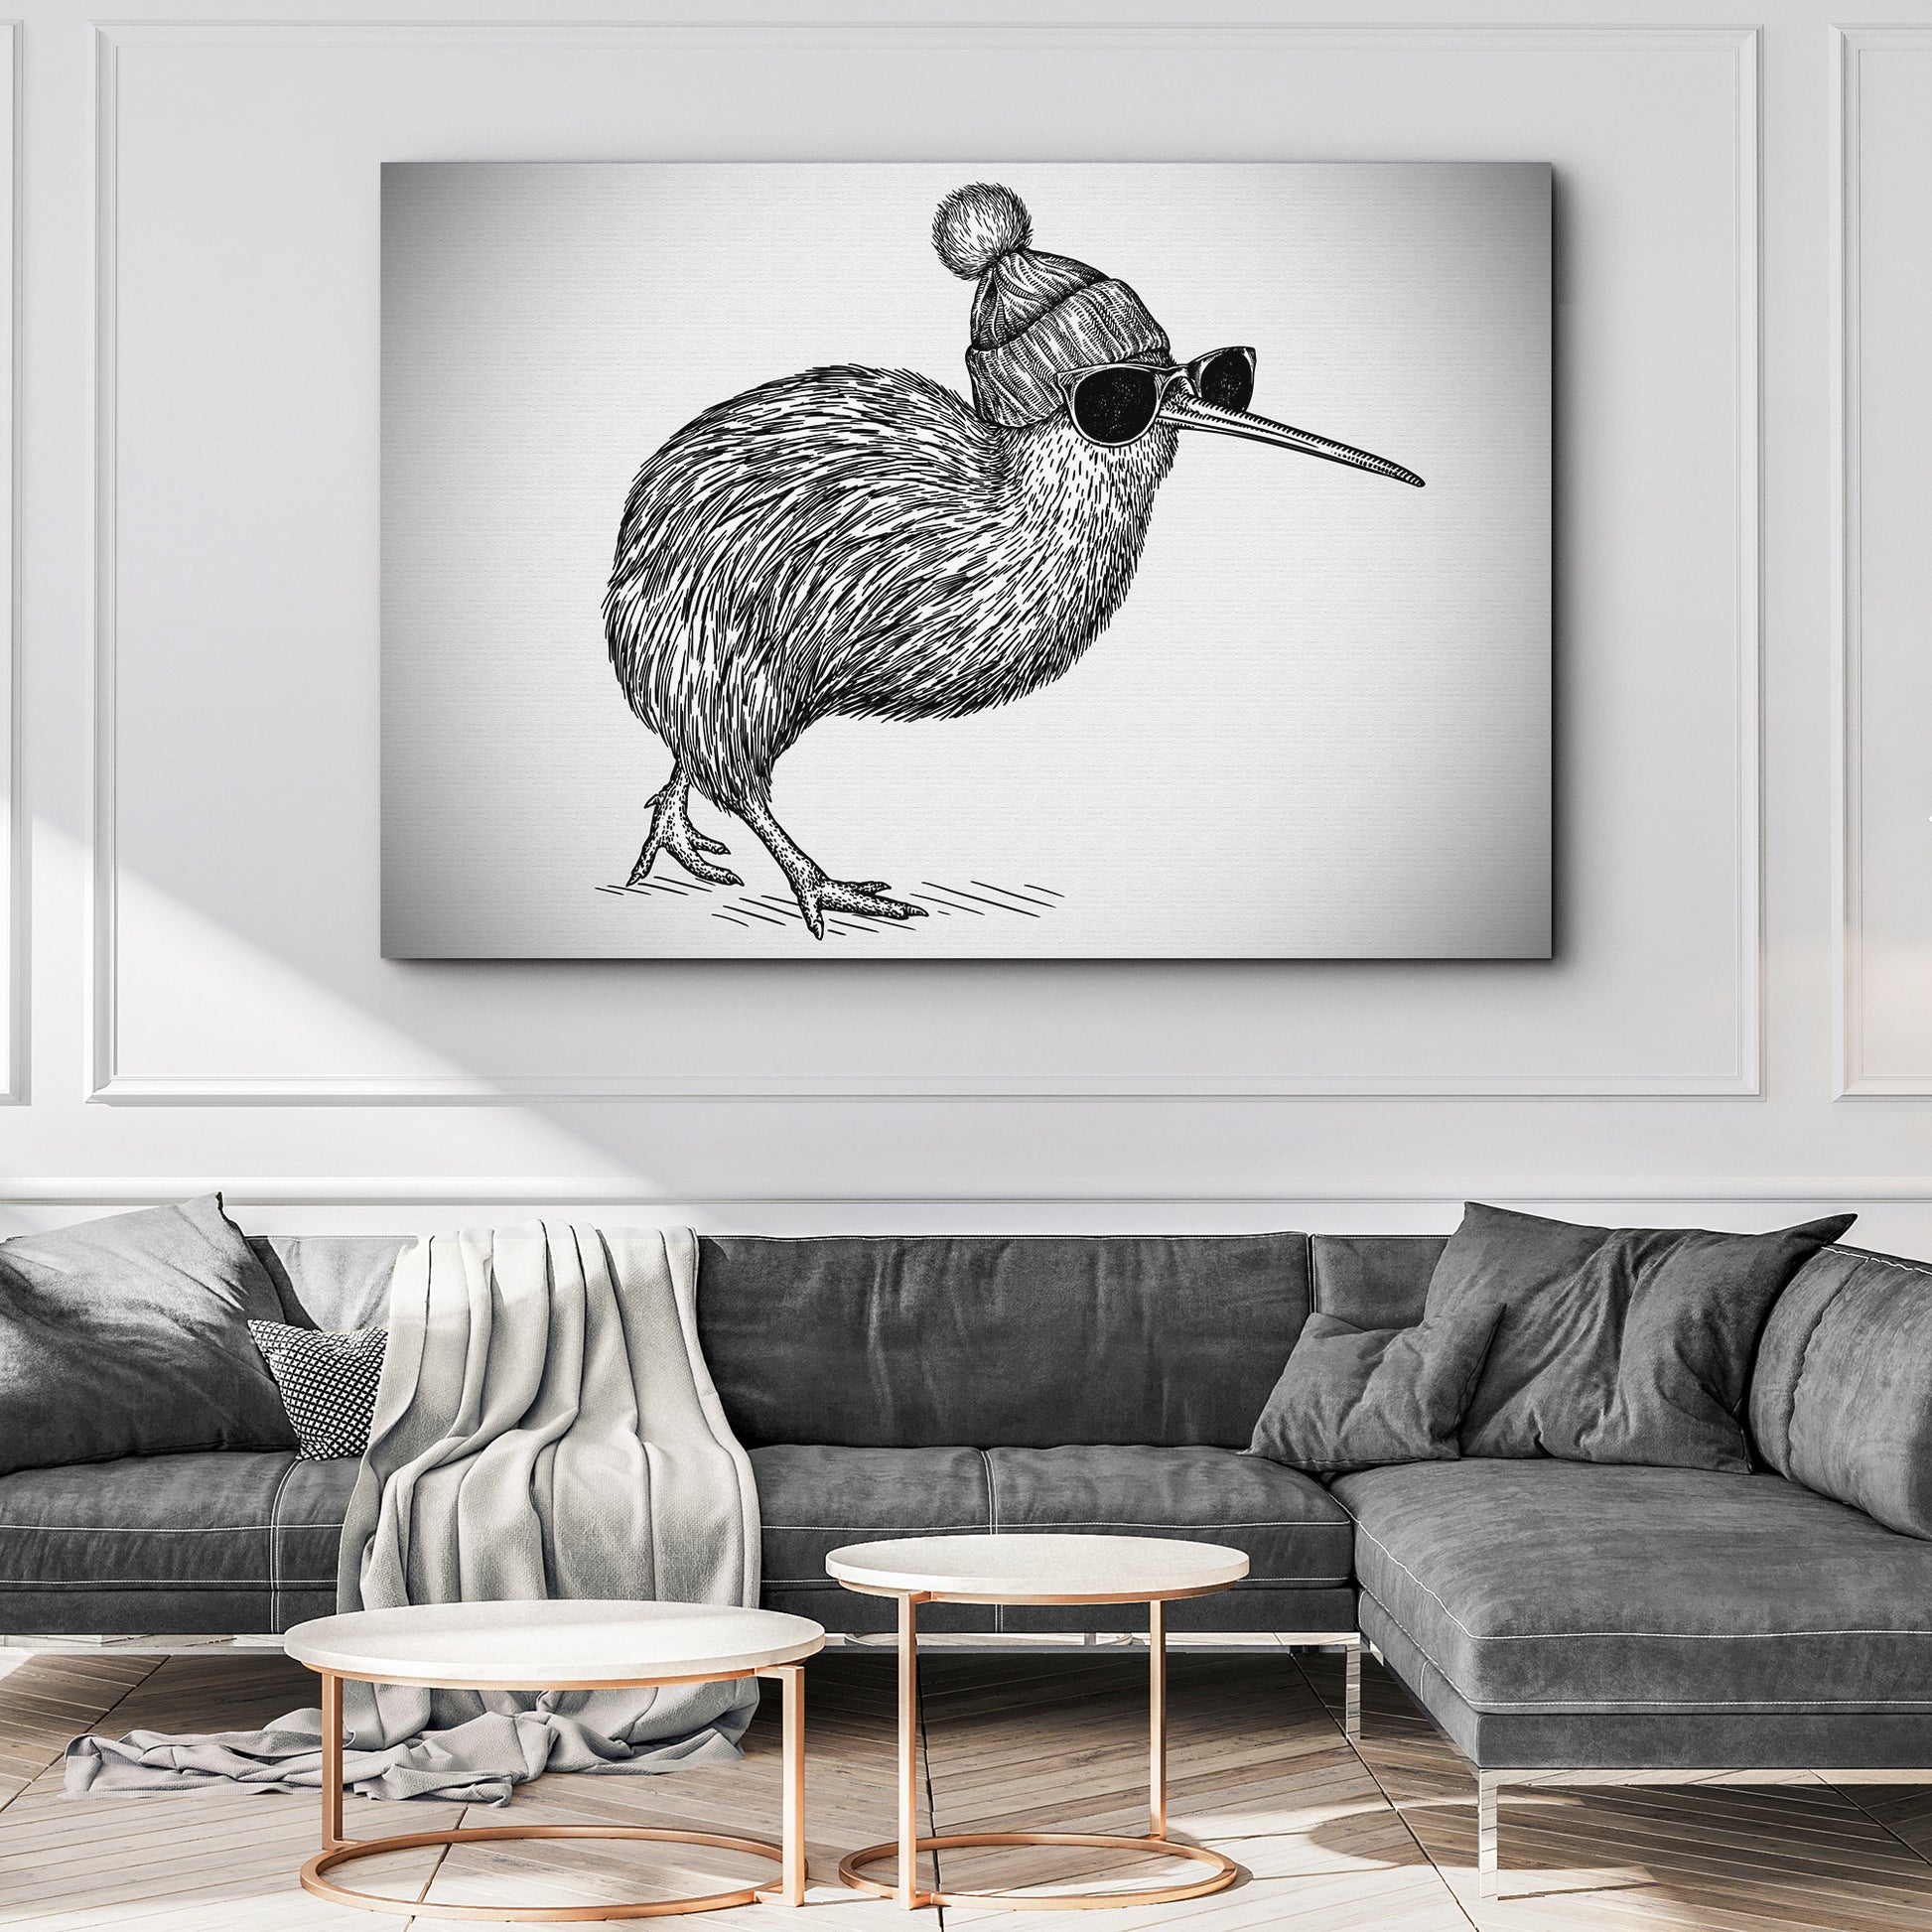 Black and White Kiwi Wall Art - Image by Tailored Canvases